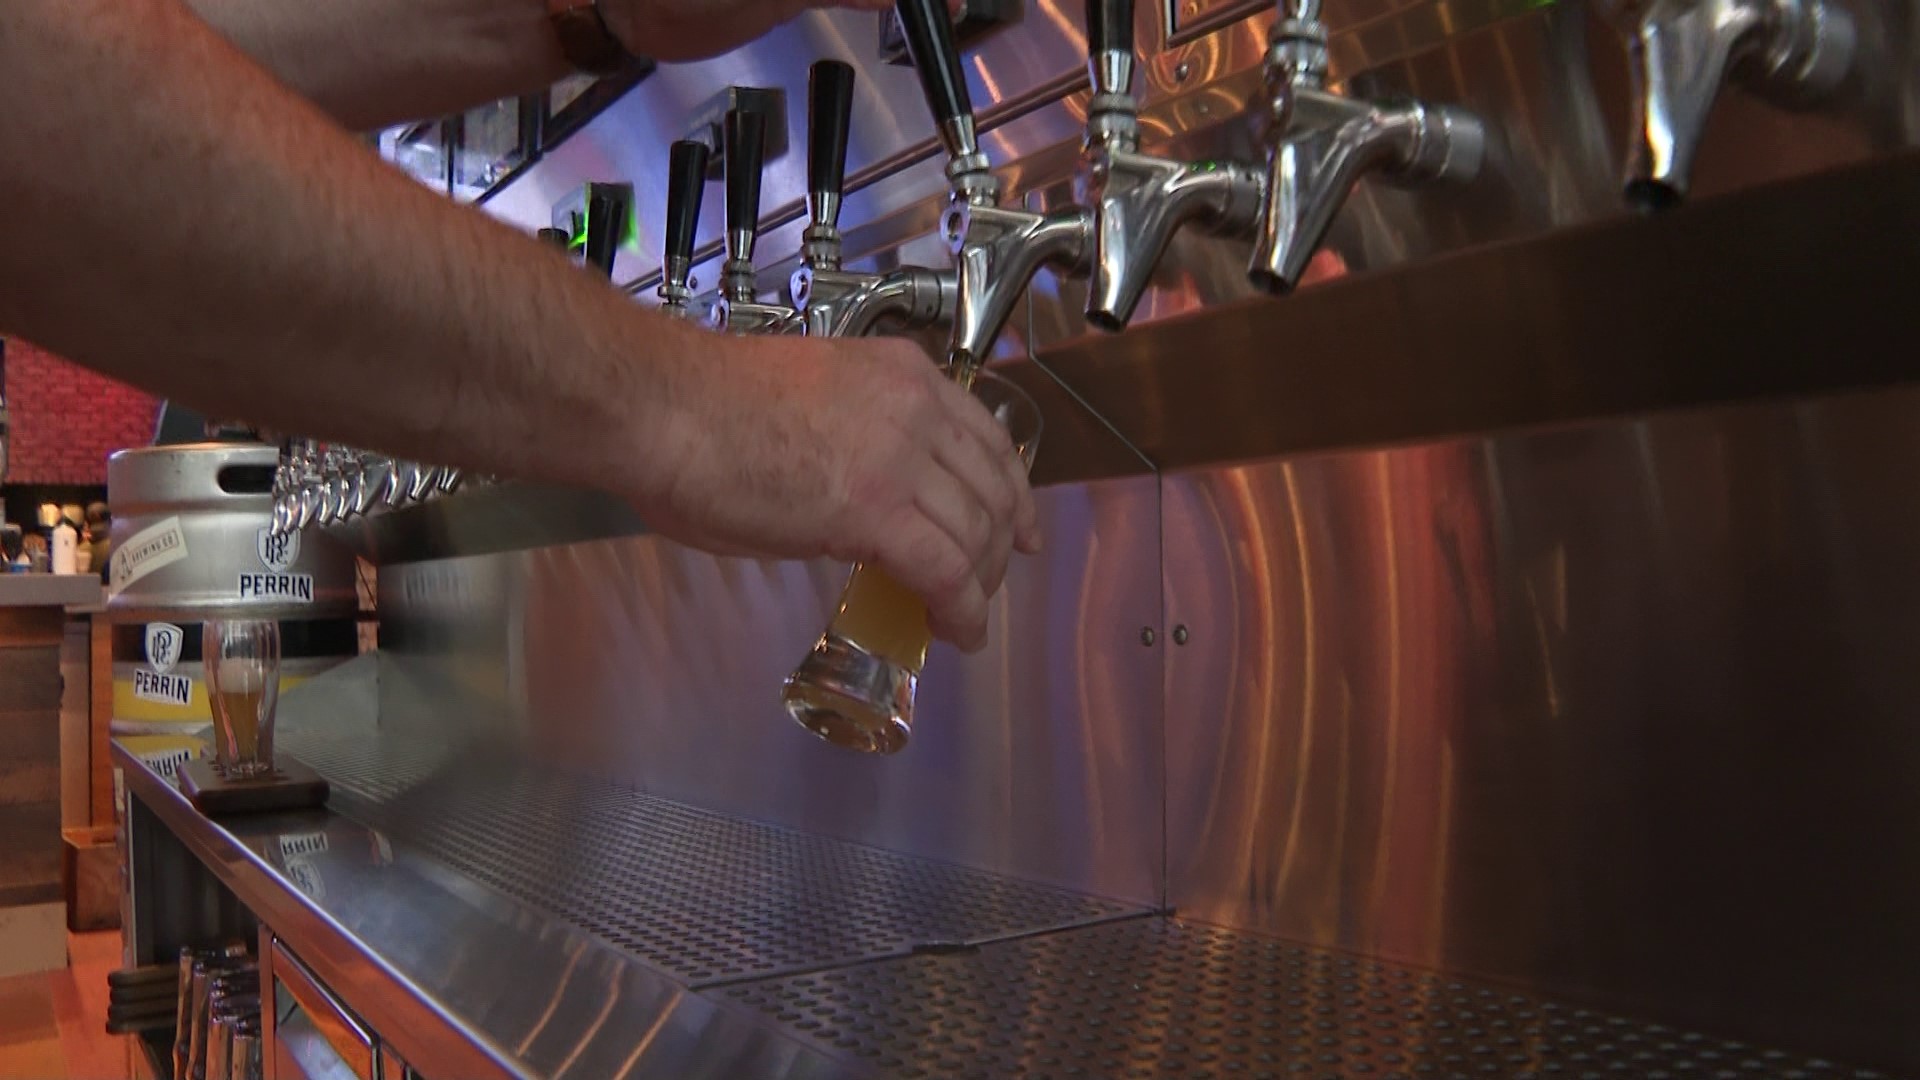 Craft Bar Kitchen at Gun Lake Casino has over 40 different beers on tap that you can enjoy by the glass or by the flight.